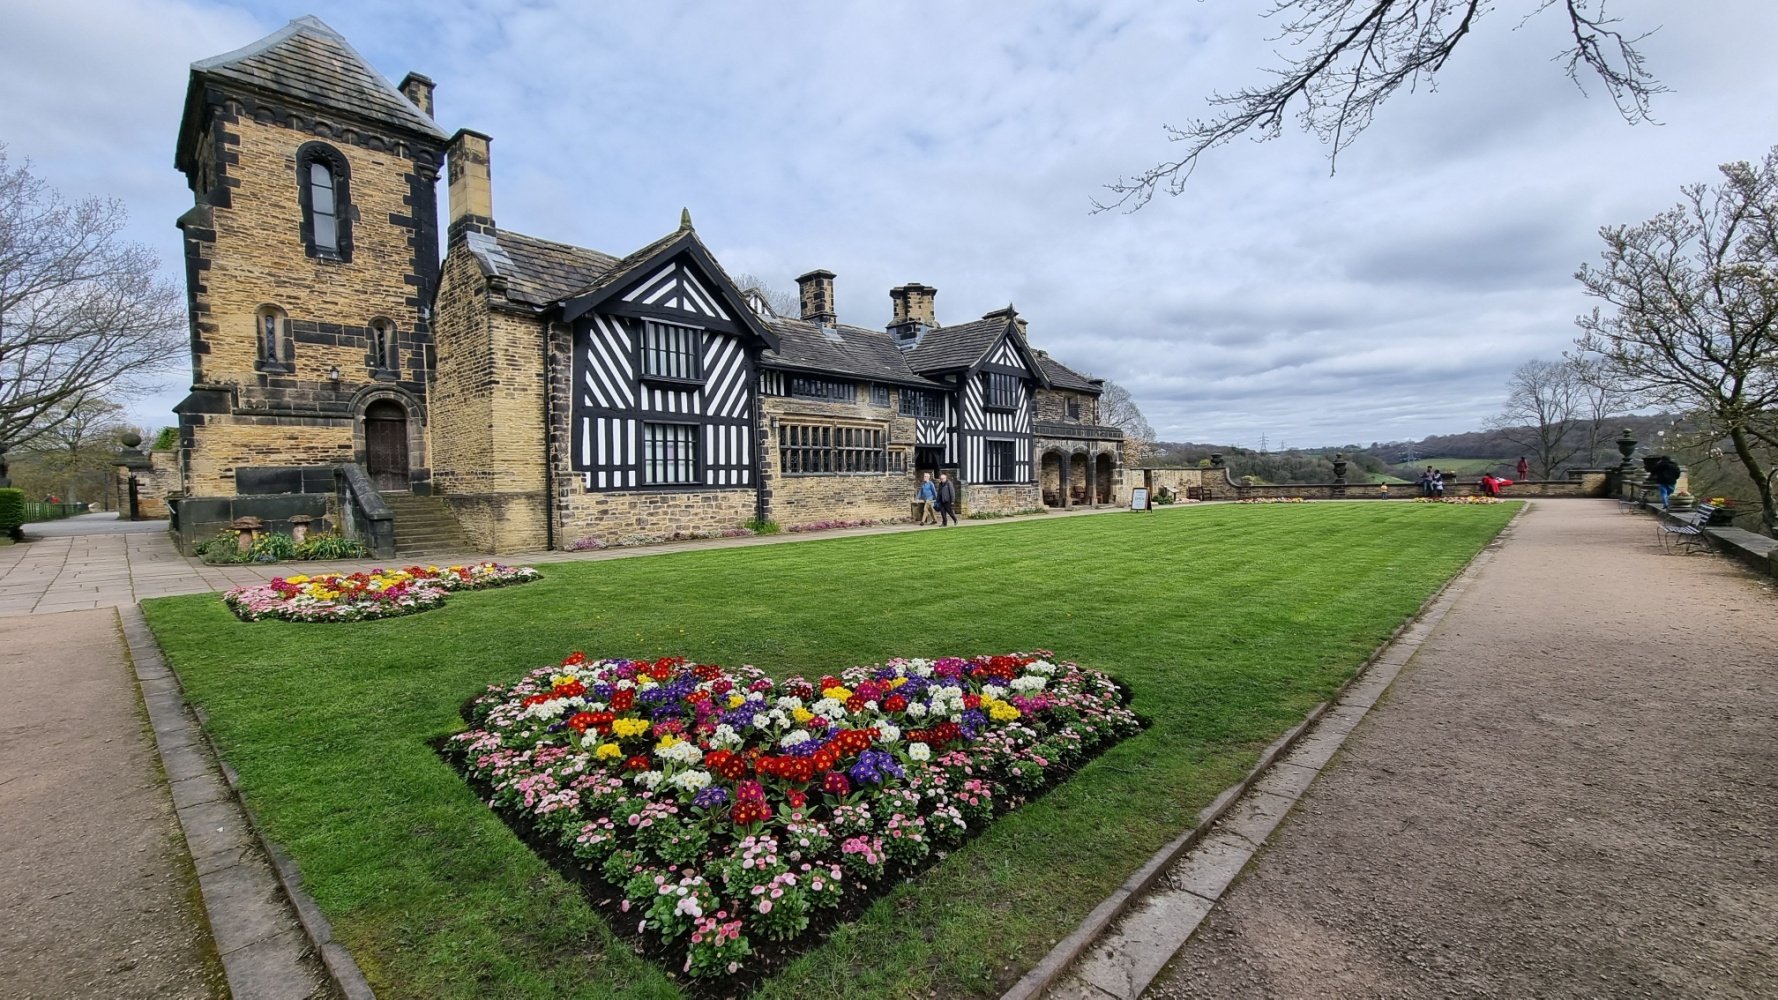 Image name shibden hall halifax west yorkshire the 20 image from the post A look at the history of Shibden Hall, with Dr Emma Wells in Yorkshire.com.